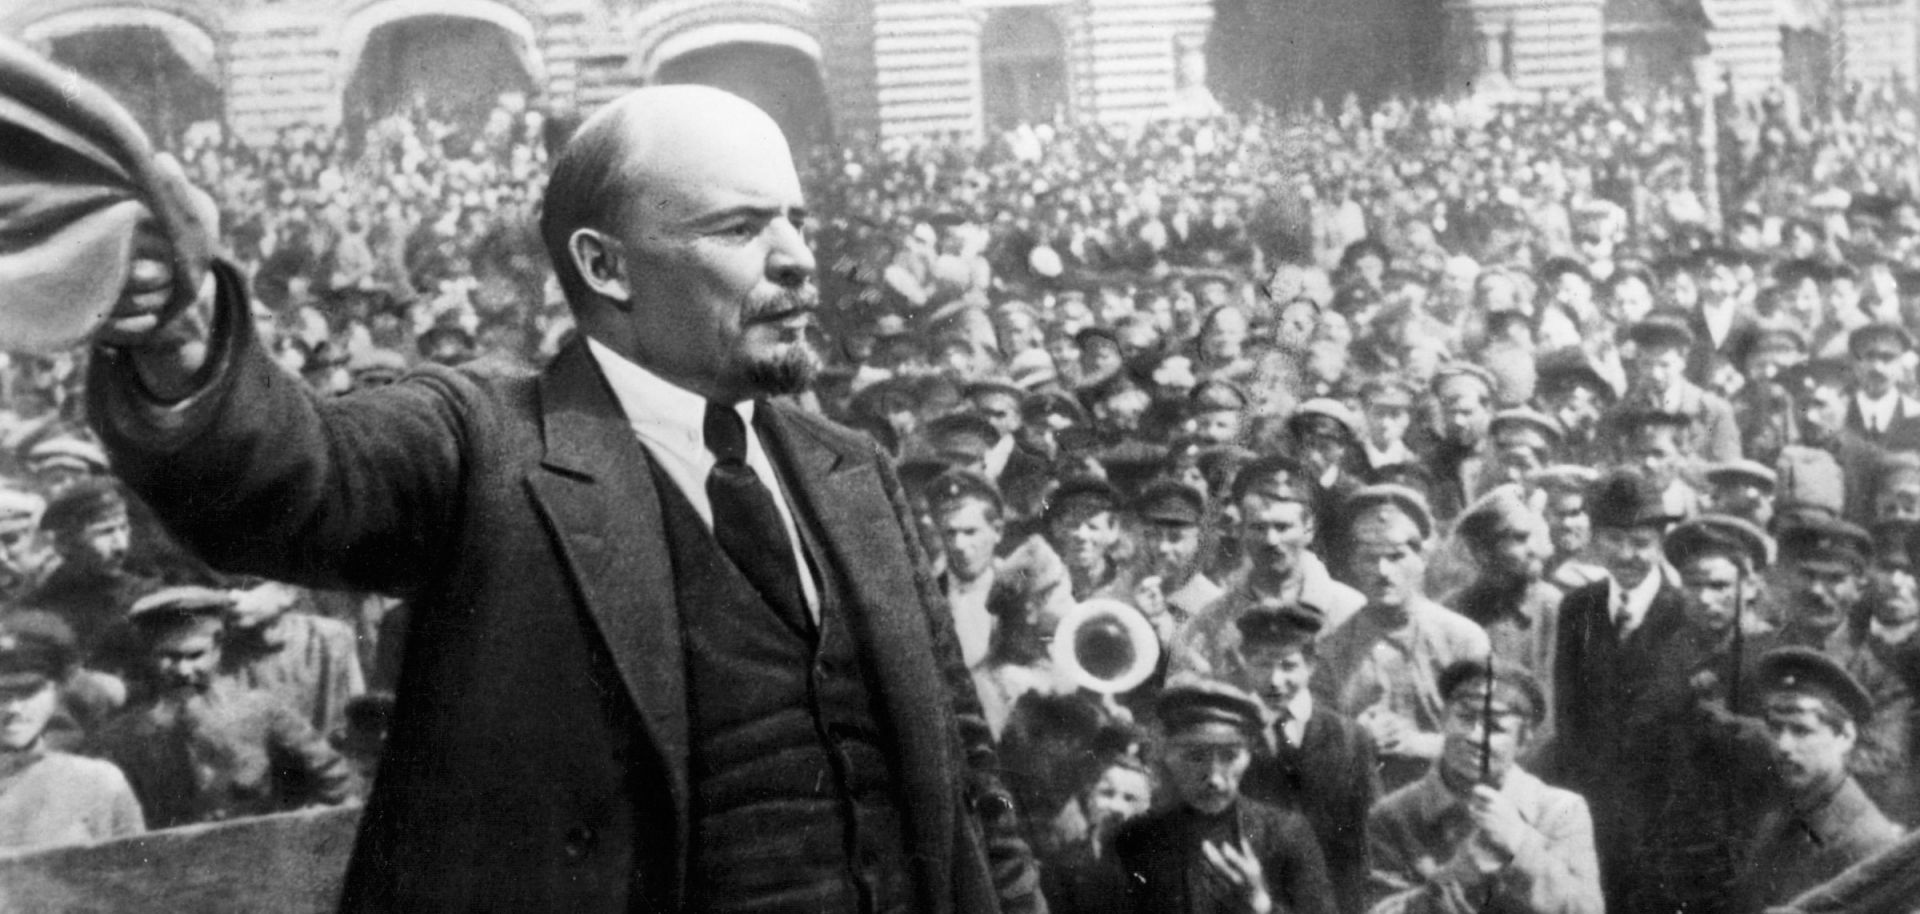 A Century Later, Lenin's Legacy Lives On